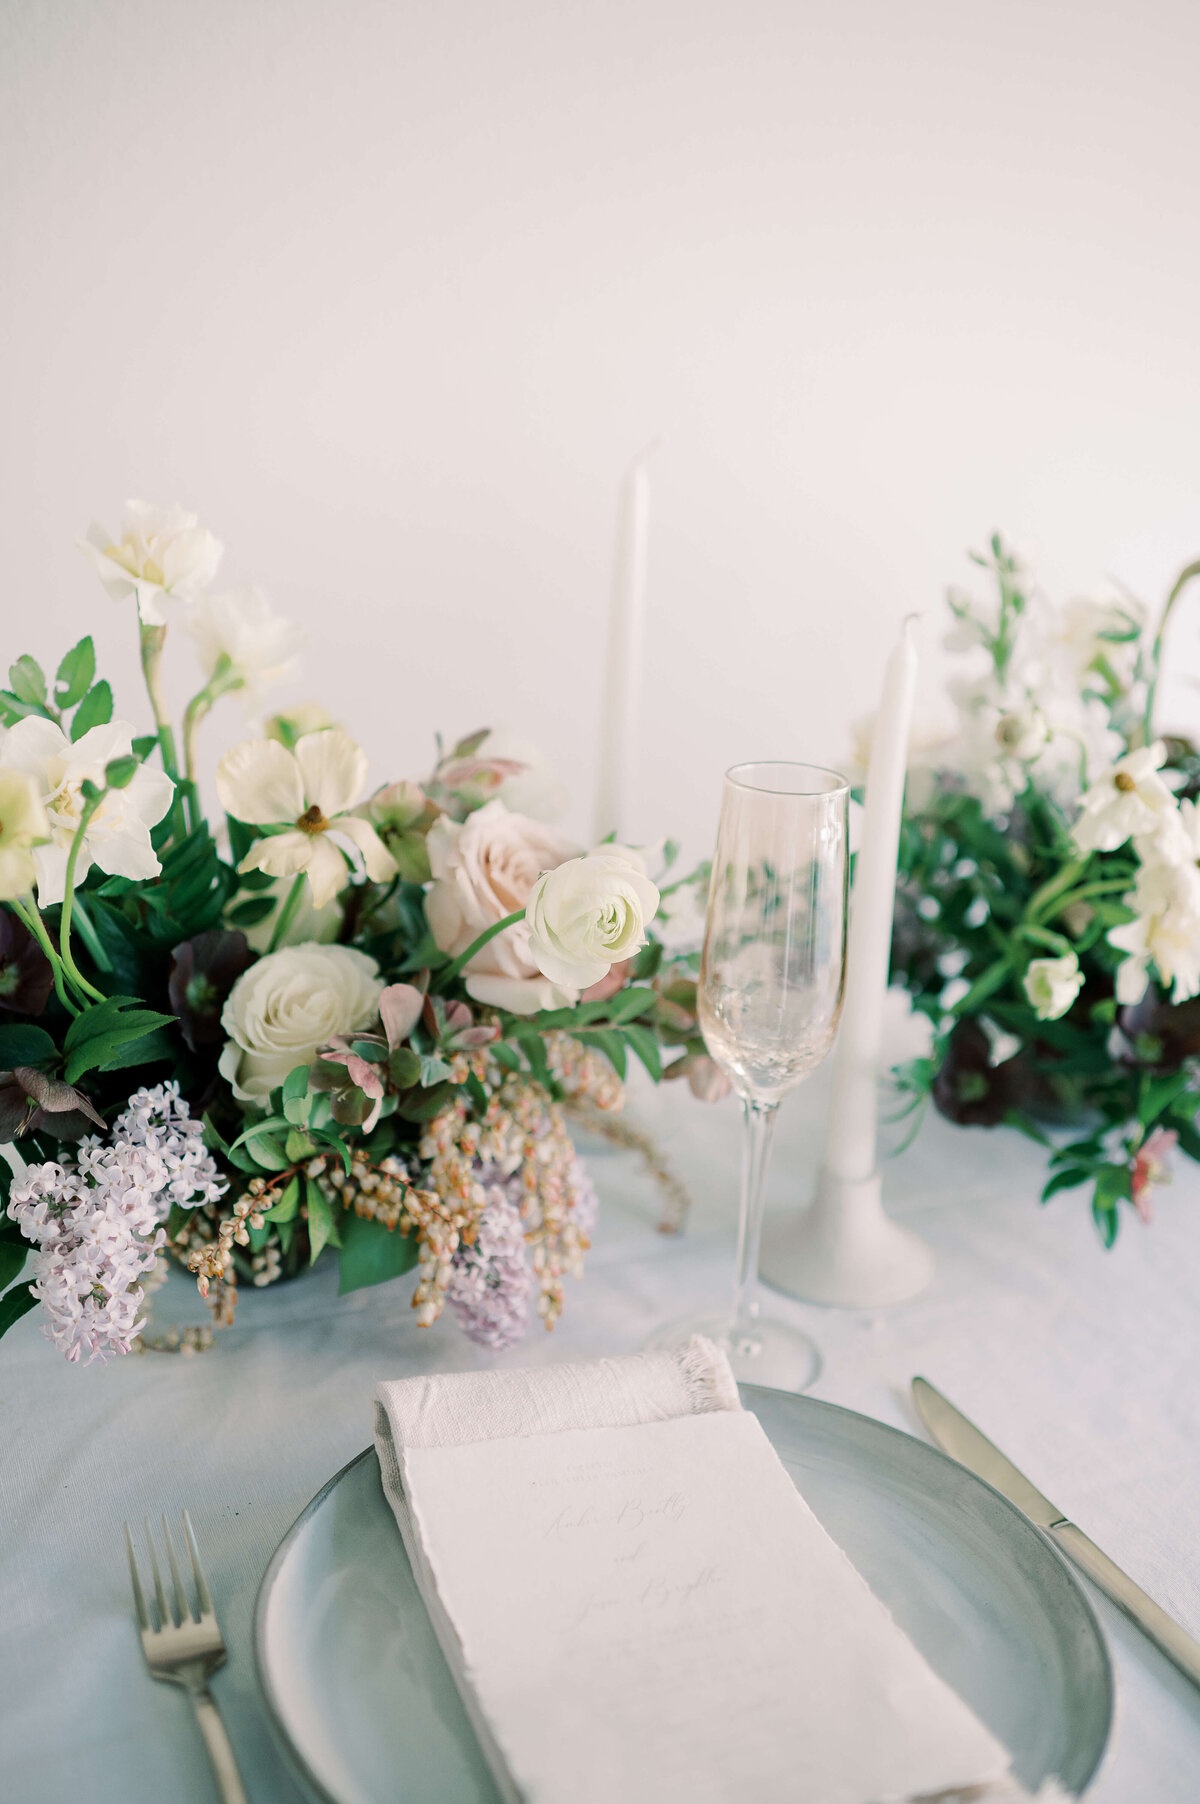 place setting with simple white napkin and floral display